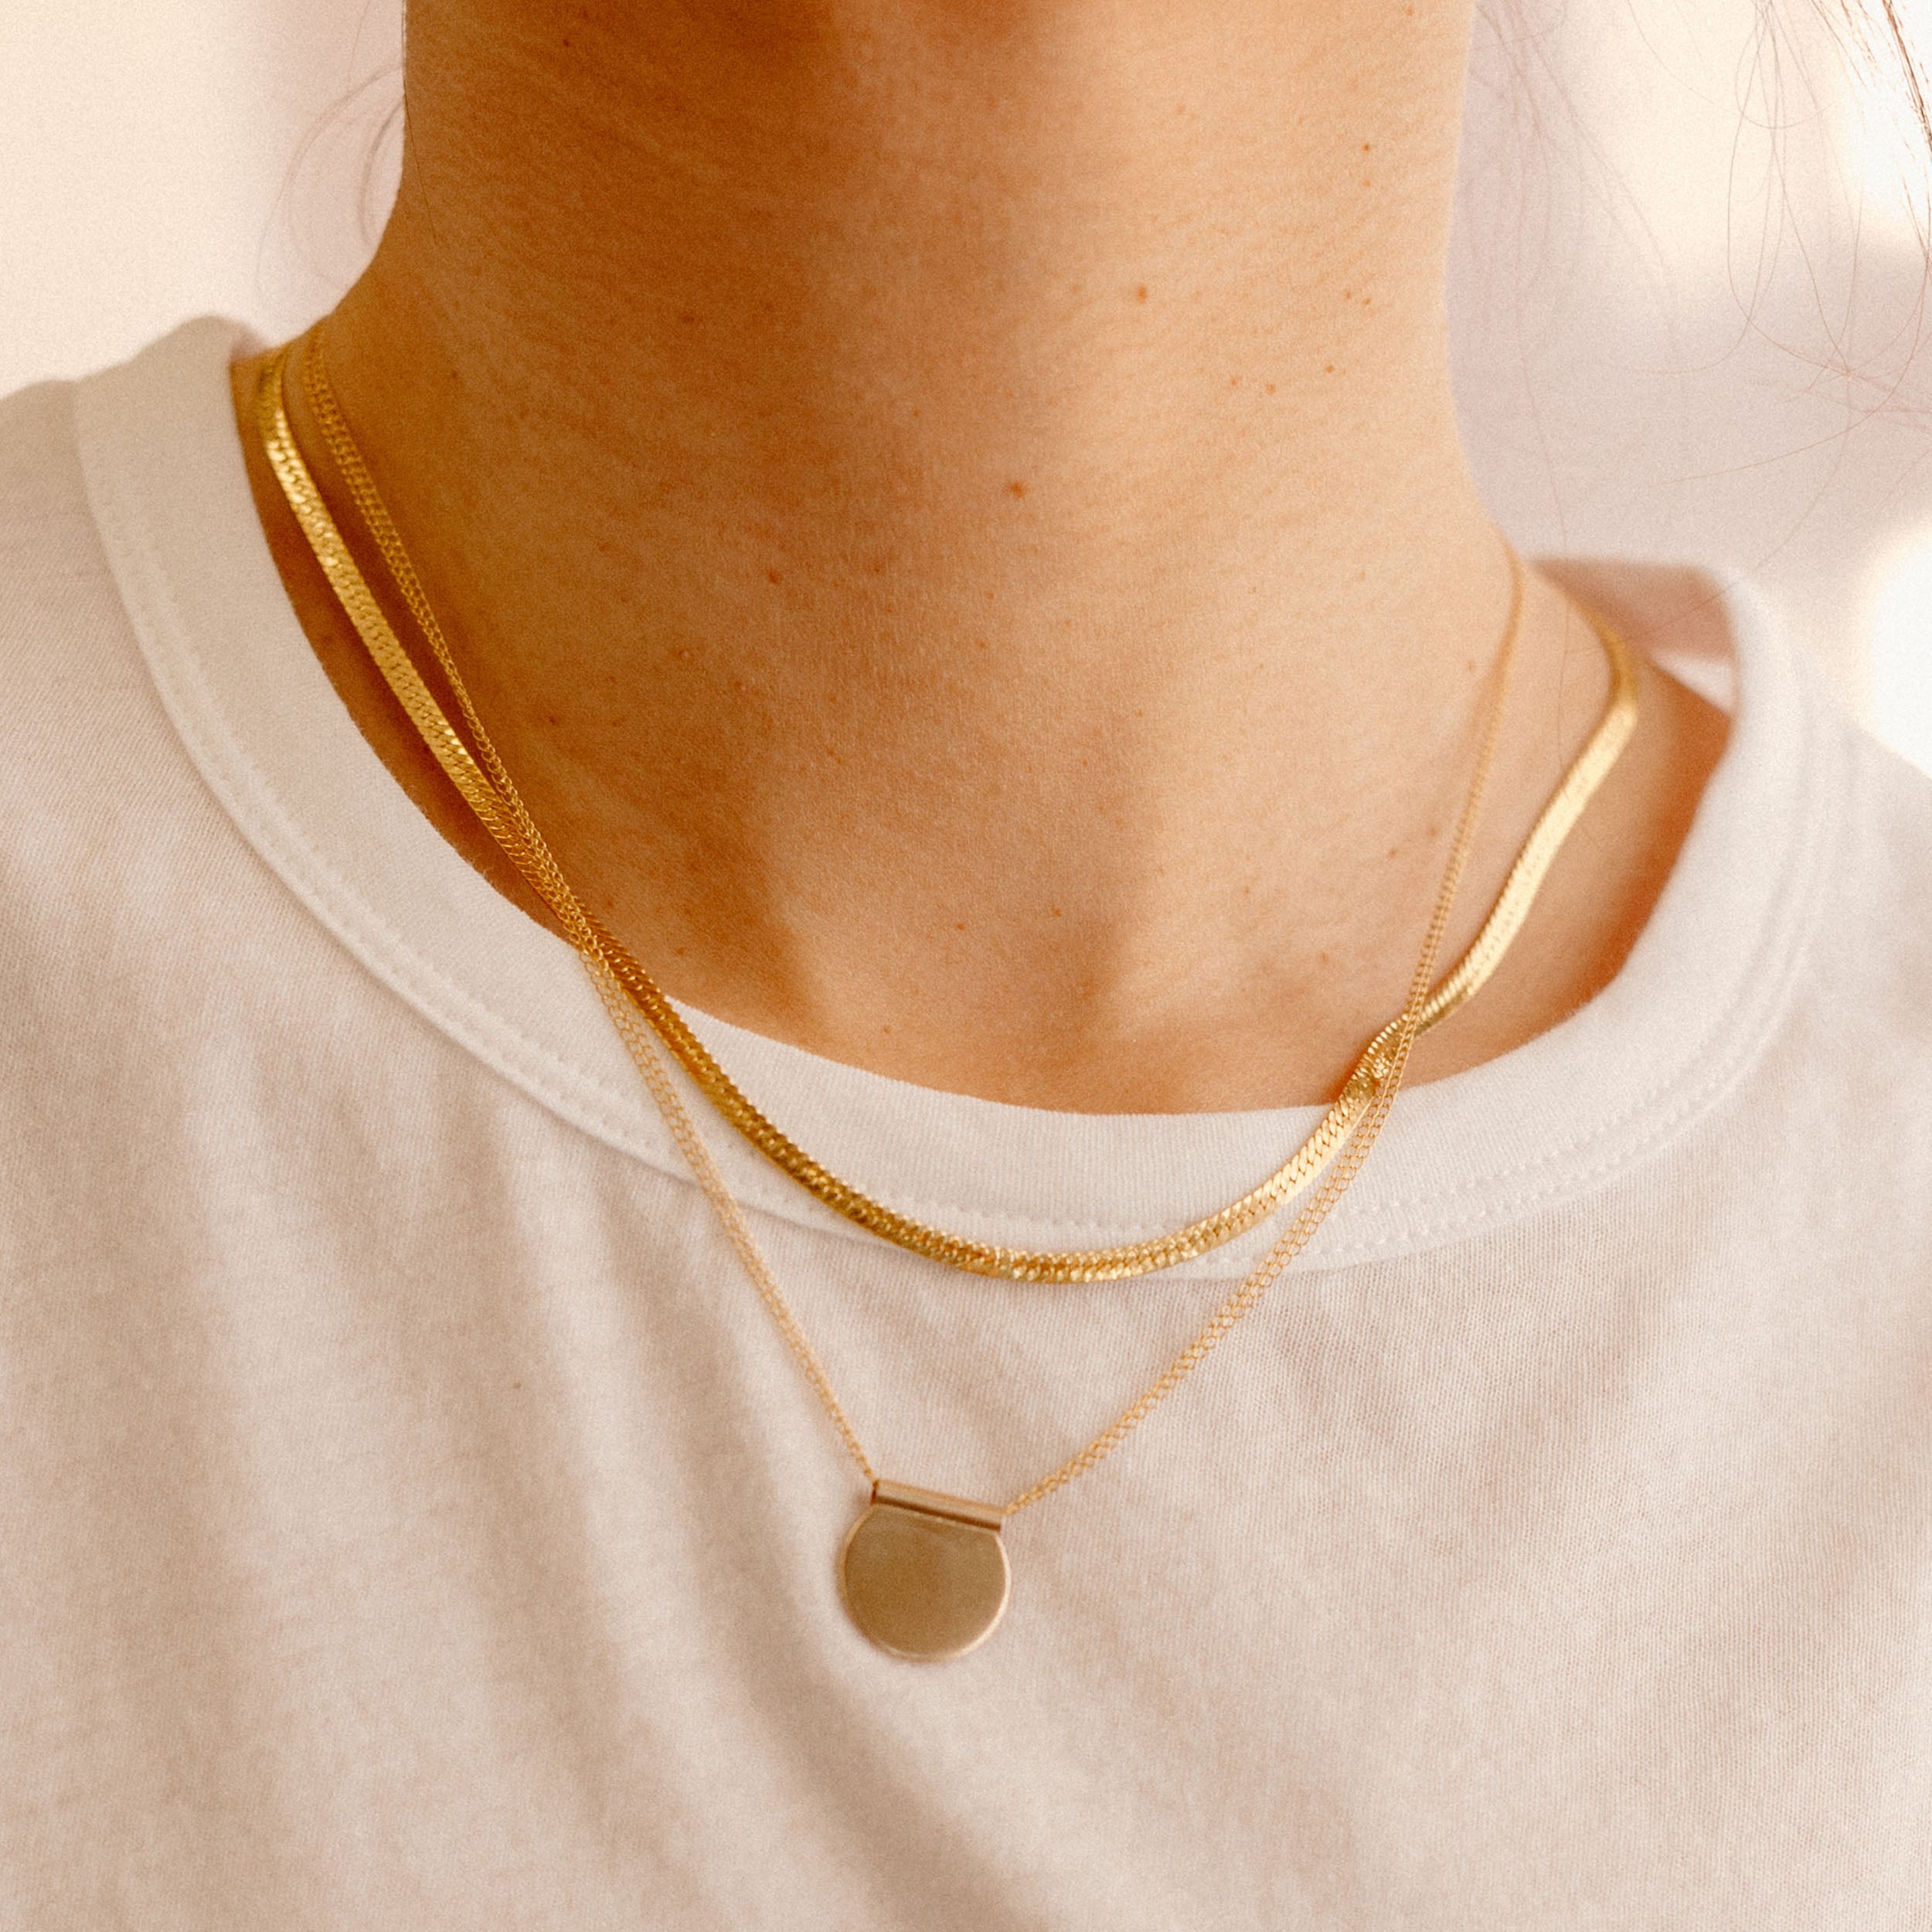 Double Chain Lira Necklace - Favor Jewelry